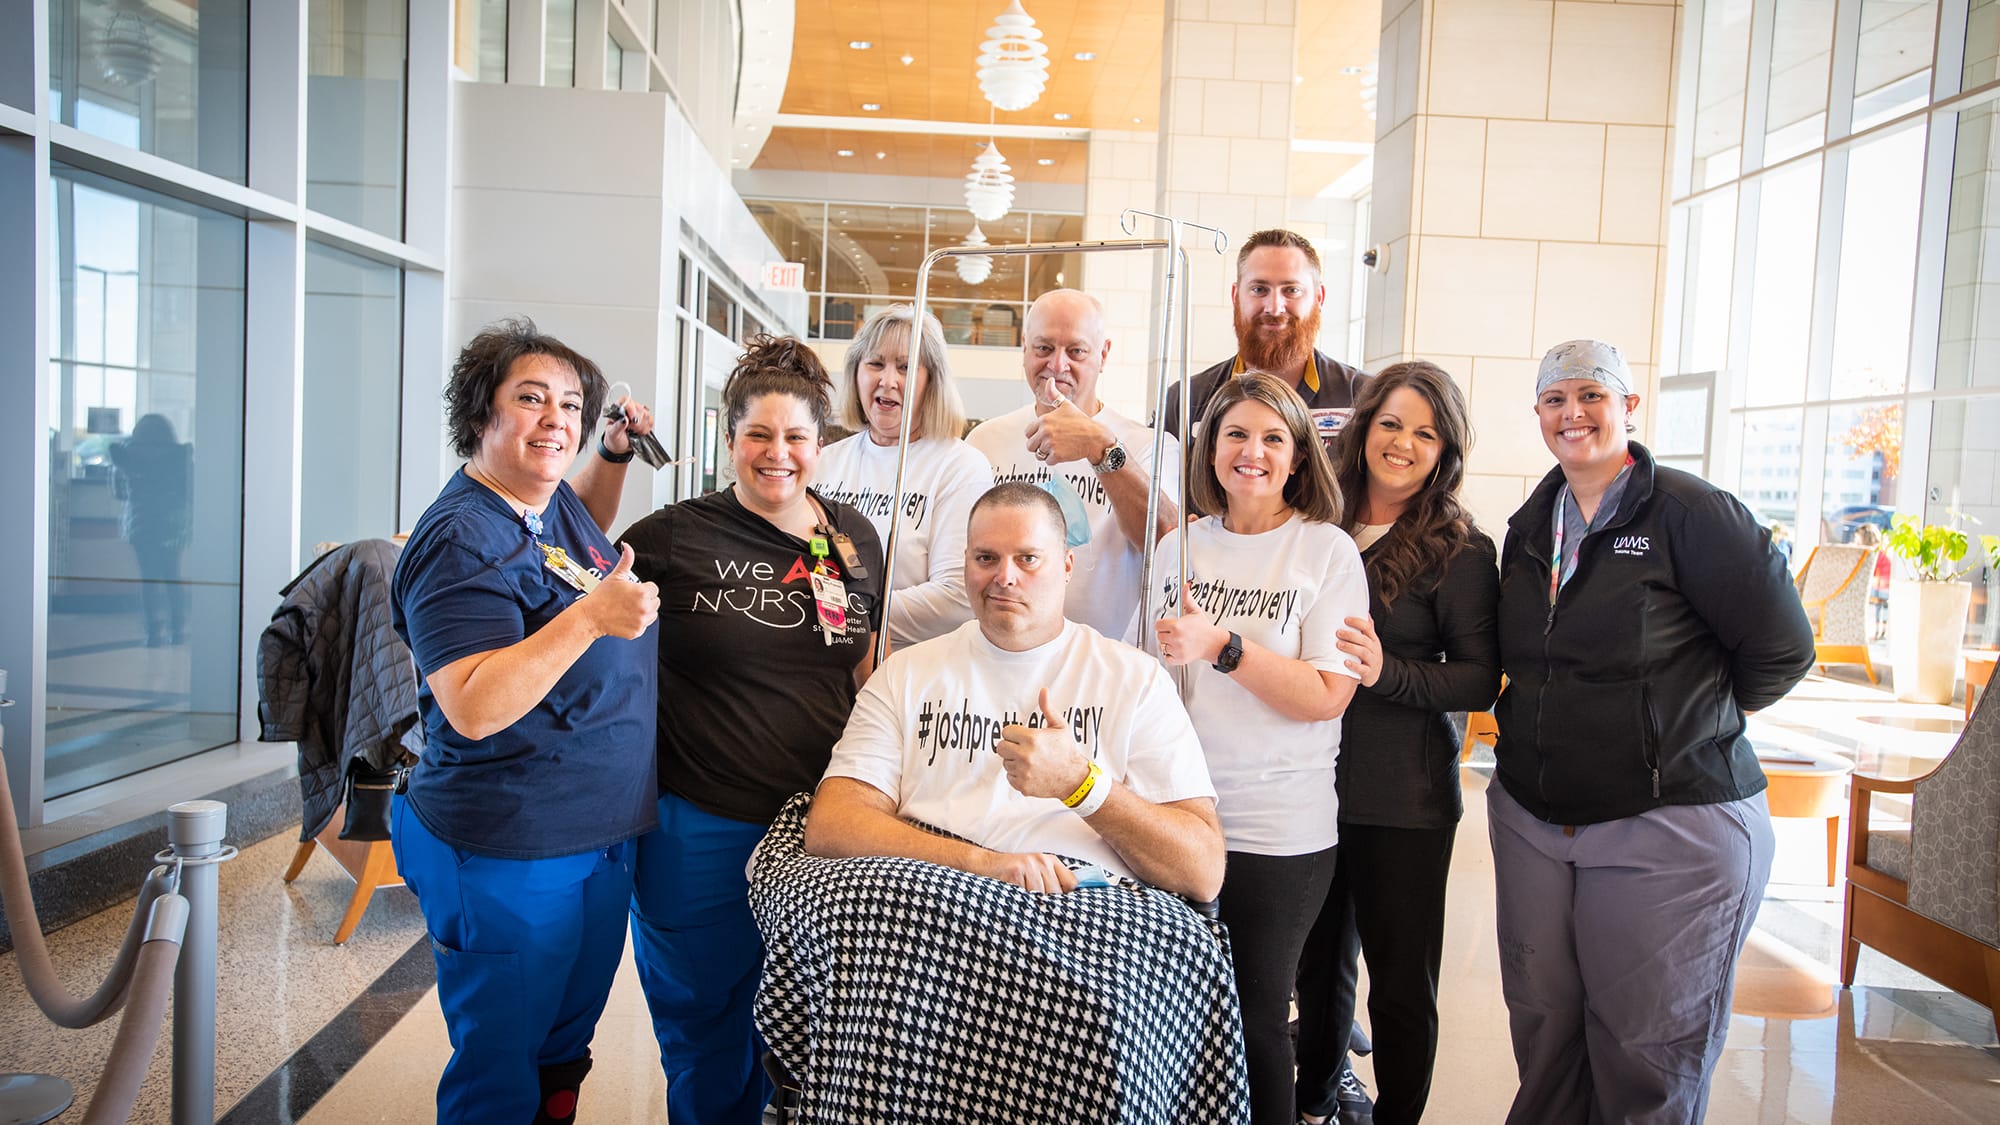 Josh Pretty, seated, gives a thumbs up just before he leaves UAMS Medical Center for what would turn out to be a shorter-than-expected stay in a local rehabilitation hospital. His wife, Alissa Pretty, third from the right, also does the same.